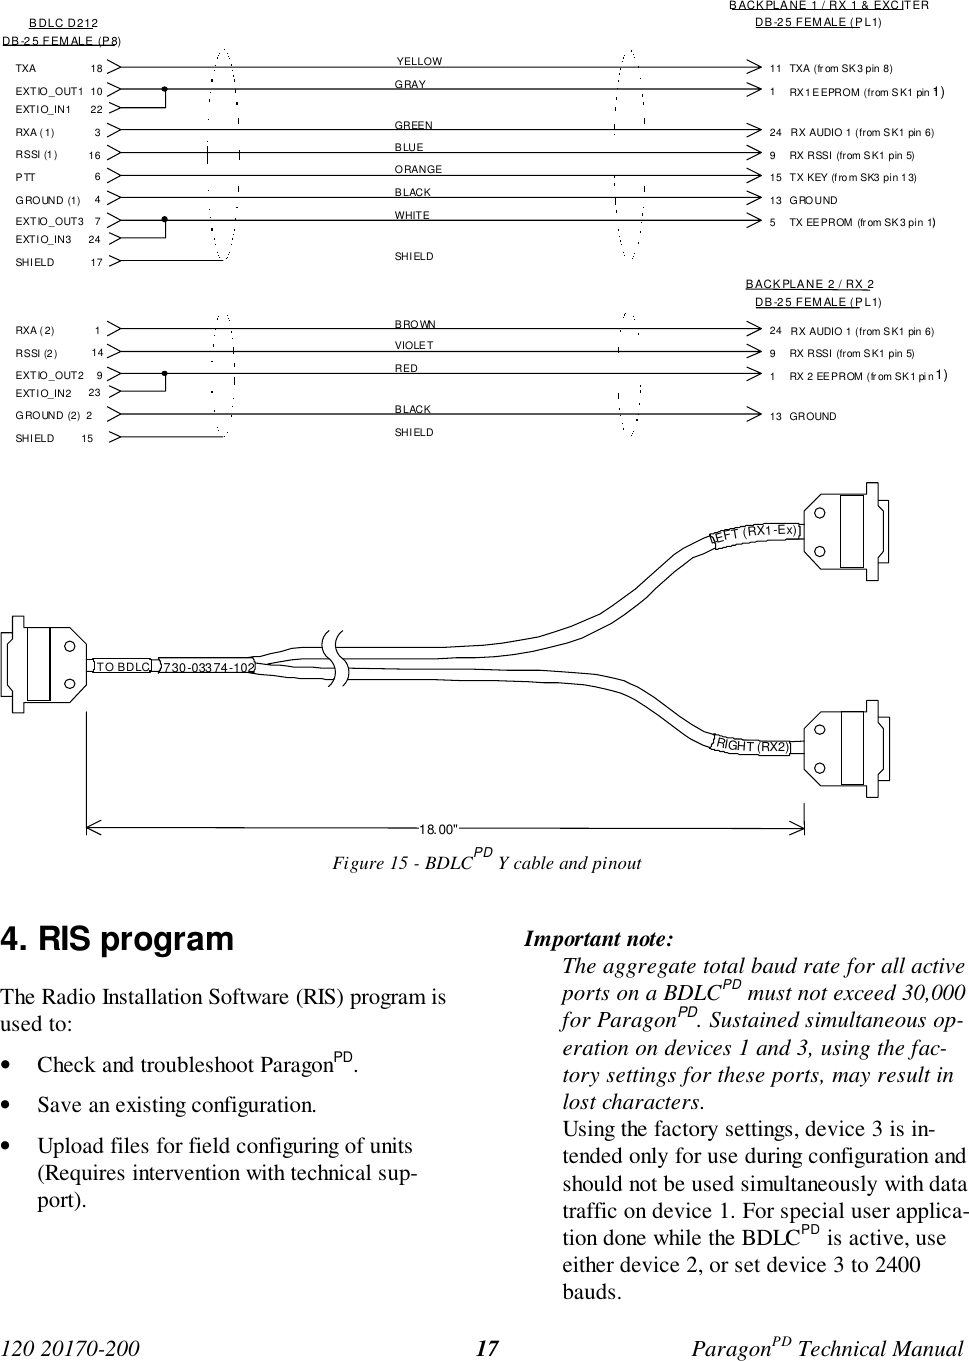 120 20170-200 ParagonPD Technical Manual17Figure 15 - BDLCPD Y cable and pinout4. RIS programThe Radio Installation Software (RIS) program isused to:• Check and troubleshoot ParagonPD.• Save an existing configuration.• Upload files for field configuring of units(Requires intervention with technical sup-port).Important note:The aggregate total baud rate for all activeports on a BDLCPD must not exceed 30,000for ParagonPD. Sustained simultaneous op-eration on devices 1 and 3, using the fac-tory settings for these ports, may result inlost characters.Using the factory settings, device 3 is in-tended only for use during configuration andshould not be used simultaneously with datatraffic on device 1. For special user applica-tion done while the BDLCPD is active, useeither device 2, or set device 3 to 2400bauds.DB-25 FEMALE (PL1)BACKPLANE 1 / RX 1 &amp; EXCITERBDLC D21218TXA TXA (fr om SK3 pin 8)111RX1 EEPROM (from SK1  pin 1EXTIO_OUT13RXA ( 1) RX AUDIO 1 (from SK1 pin 6)249  RX RSSI  (from SK1 pin  5)RSSI (1) 166PTT 15SH I ELDYELLOWGRAYGREENBLUEORANGE17SH I ELDRXA ( 2) RX AUDIO 1 (from SK1 pin 6)249  RX RSSI  (from SK1 pin  5)RSSI (2)2GROUND (2) 13SH I ELDBROWNVIOLETRED15SH I ELDDB-25 FEMALE (P8)EXTIO_IN11022GROUND (1) 4BLACKEXTIO_OUT3 7 WHITEEXTIO_IN3 24TX KEY  (f rom SK3  pi n 1 3)13 GROUNDTX EEPROM  (from SK3 pin  1)51149EXTIO_OUT2EXTIO_IN2 231  RX 2 EEPROM (from SK1 pin GROUND DB-25 FEMALE (PL1)BACKPLANE 2 / RX 2BLACK18.00&quot; 730-03374-102 LEFT (RX1-Ex)RIGHT (RX2)TO BDLC1)1))